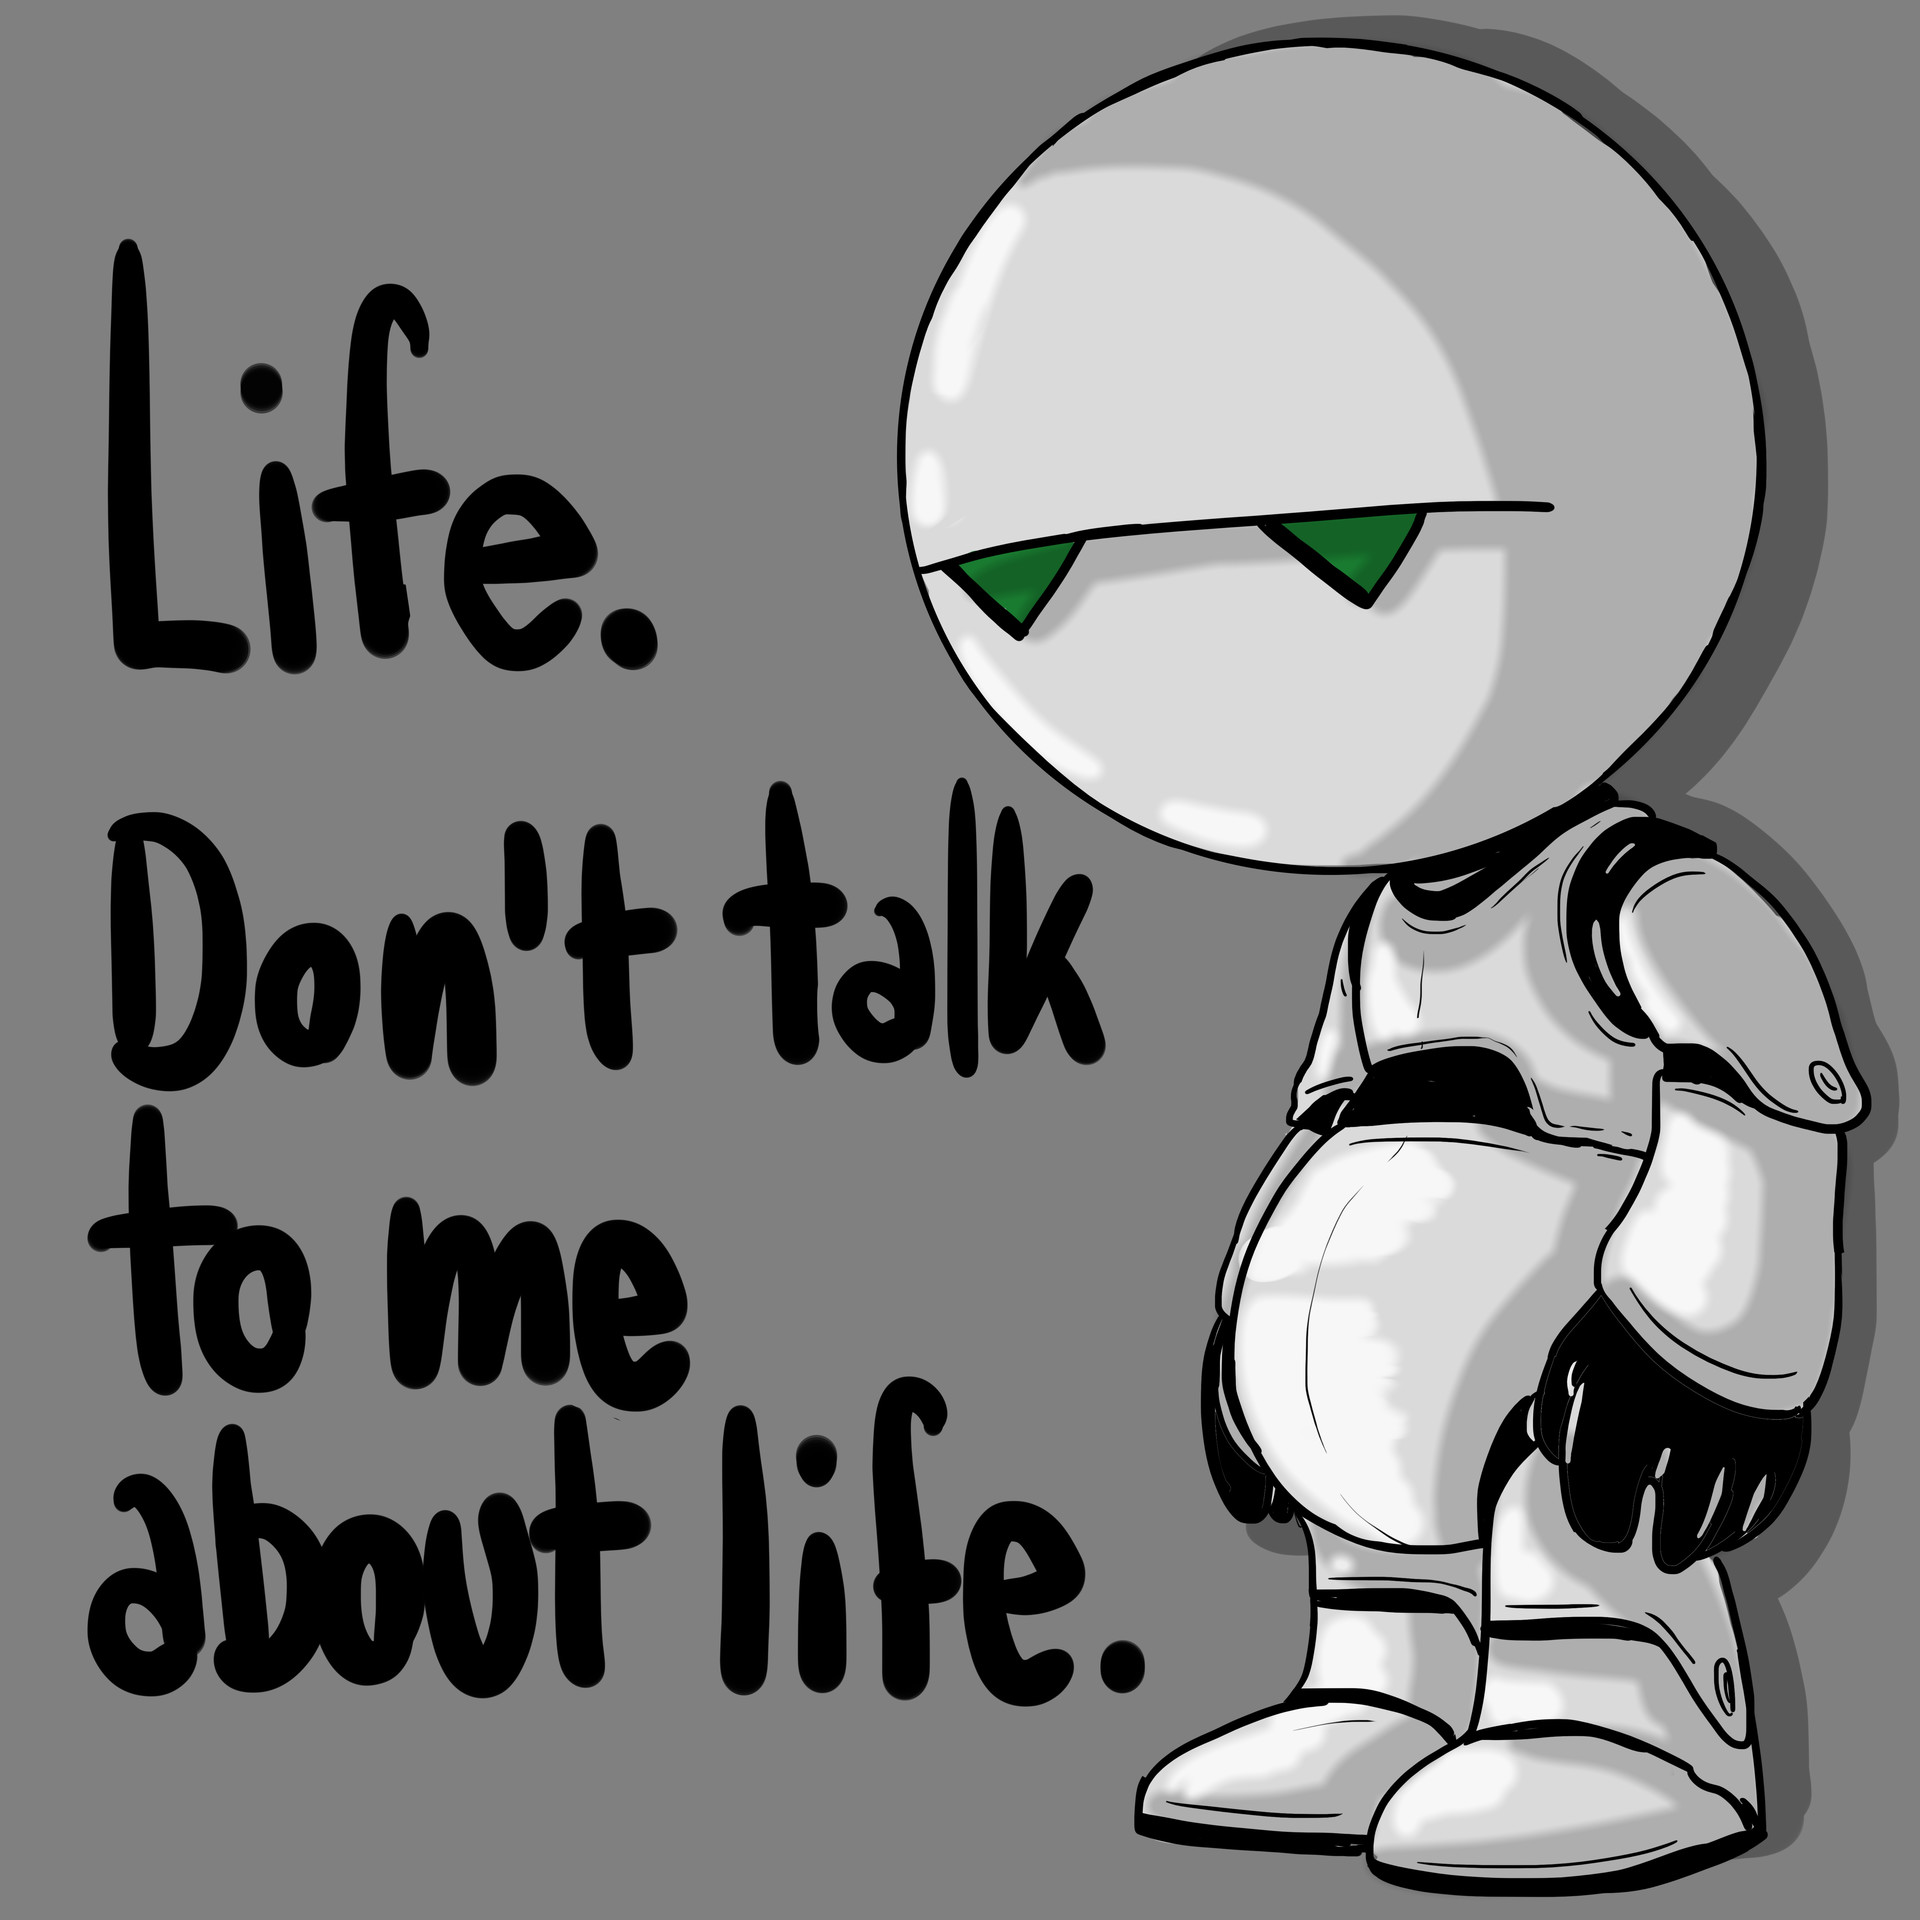 Image result for life don't talk to me about life"